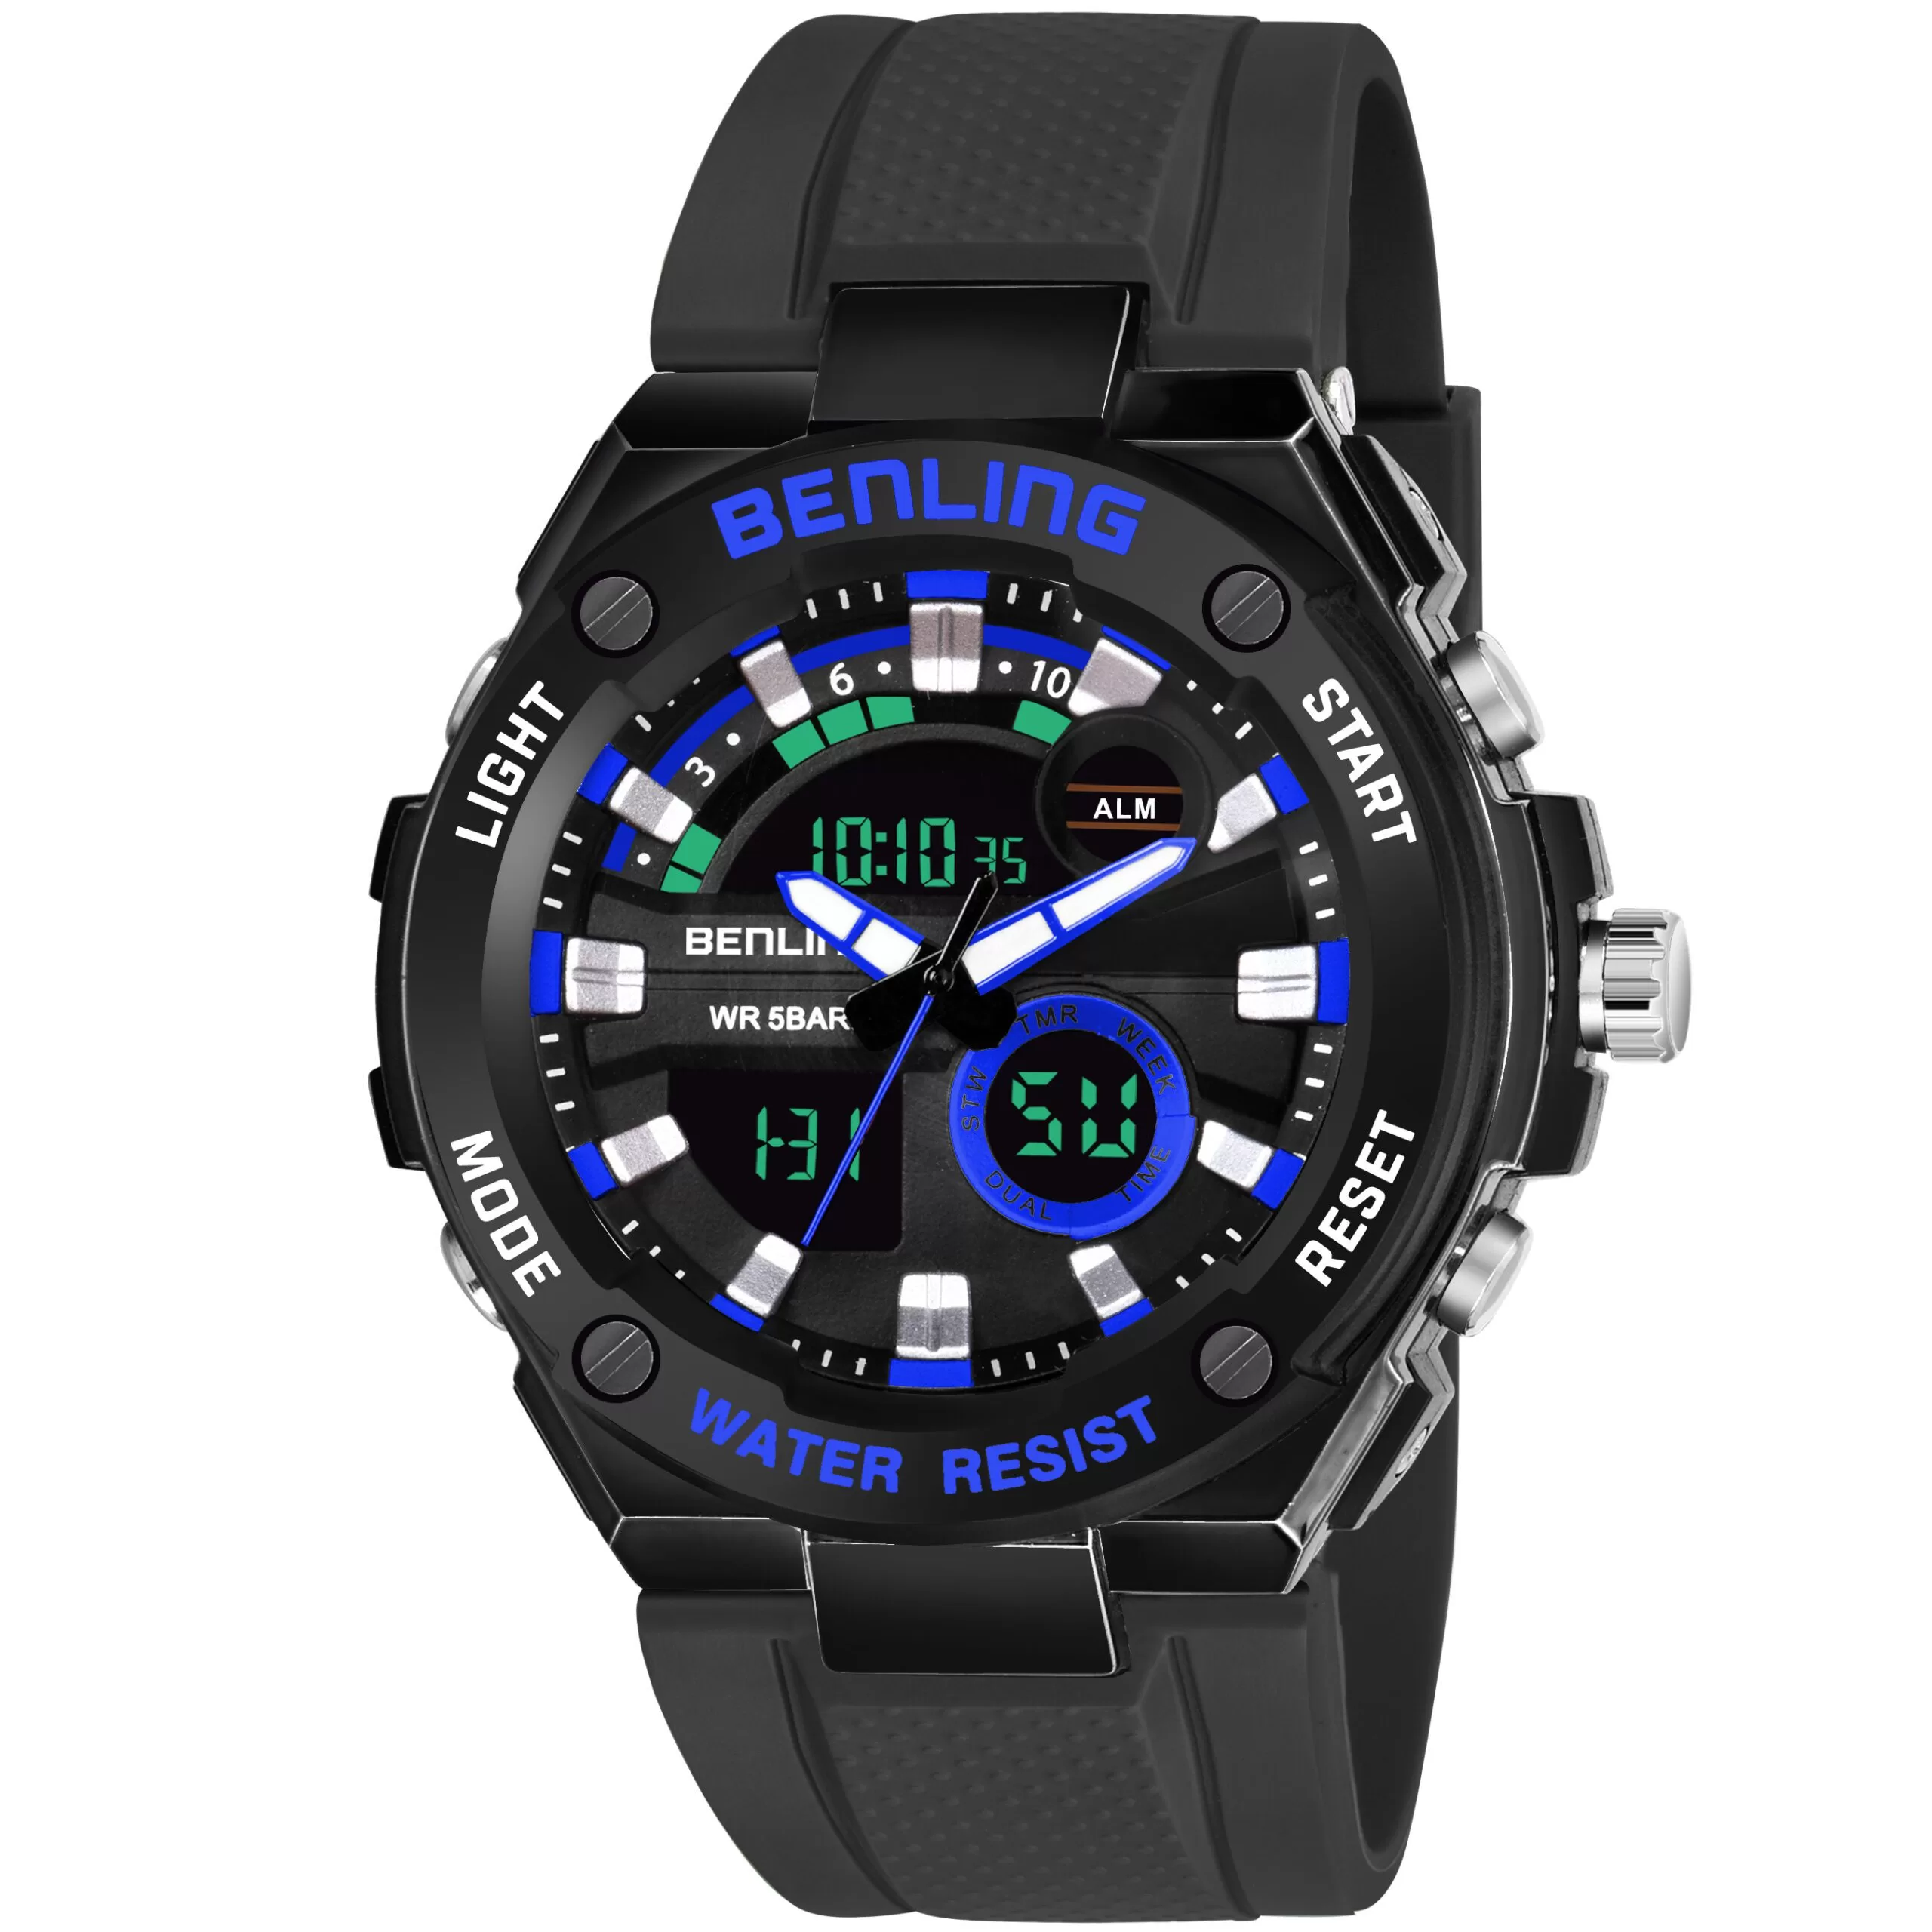 BENLING latest watches